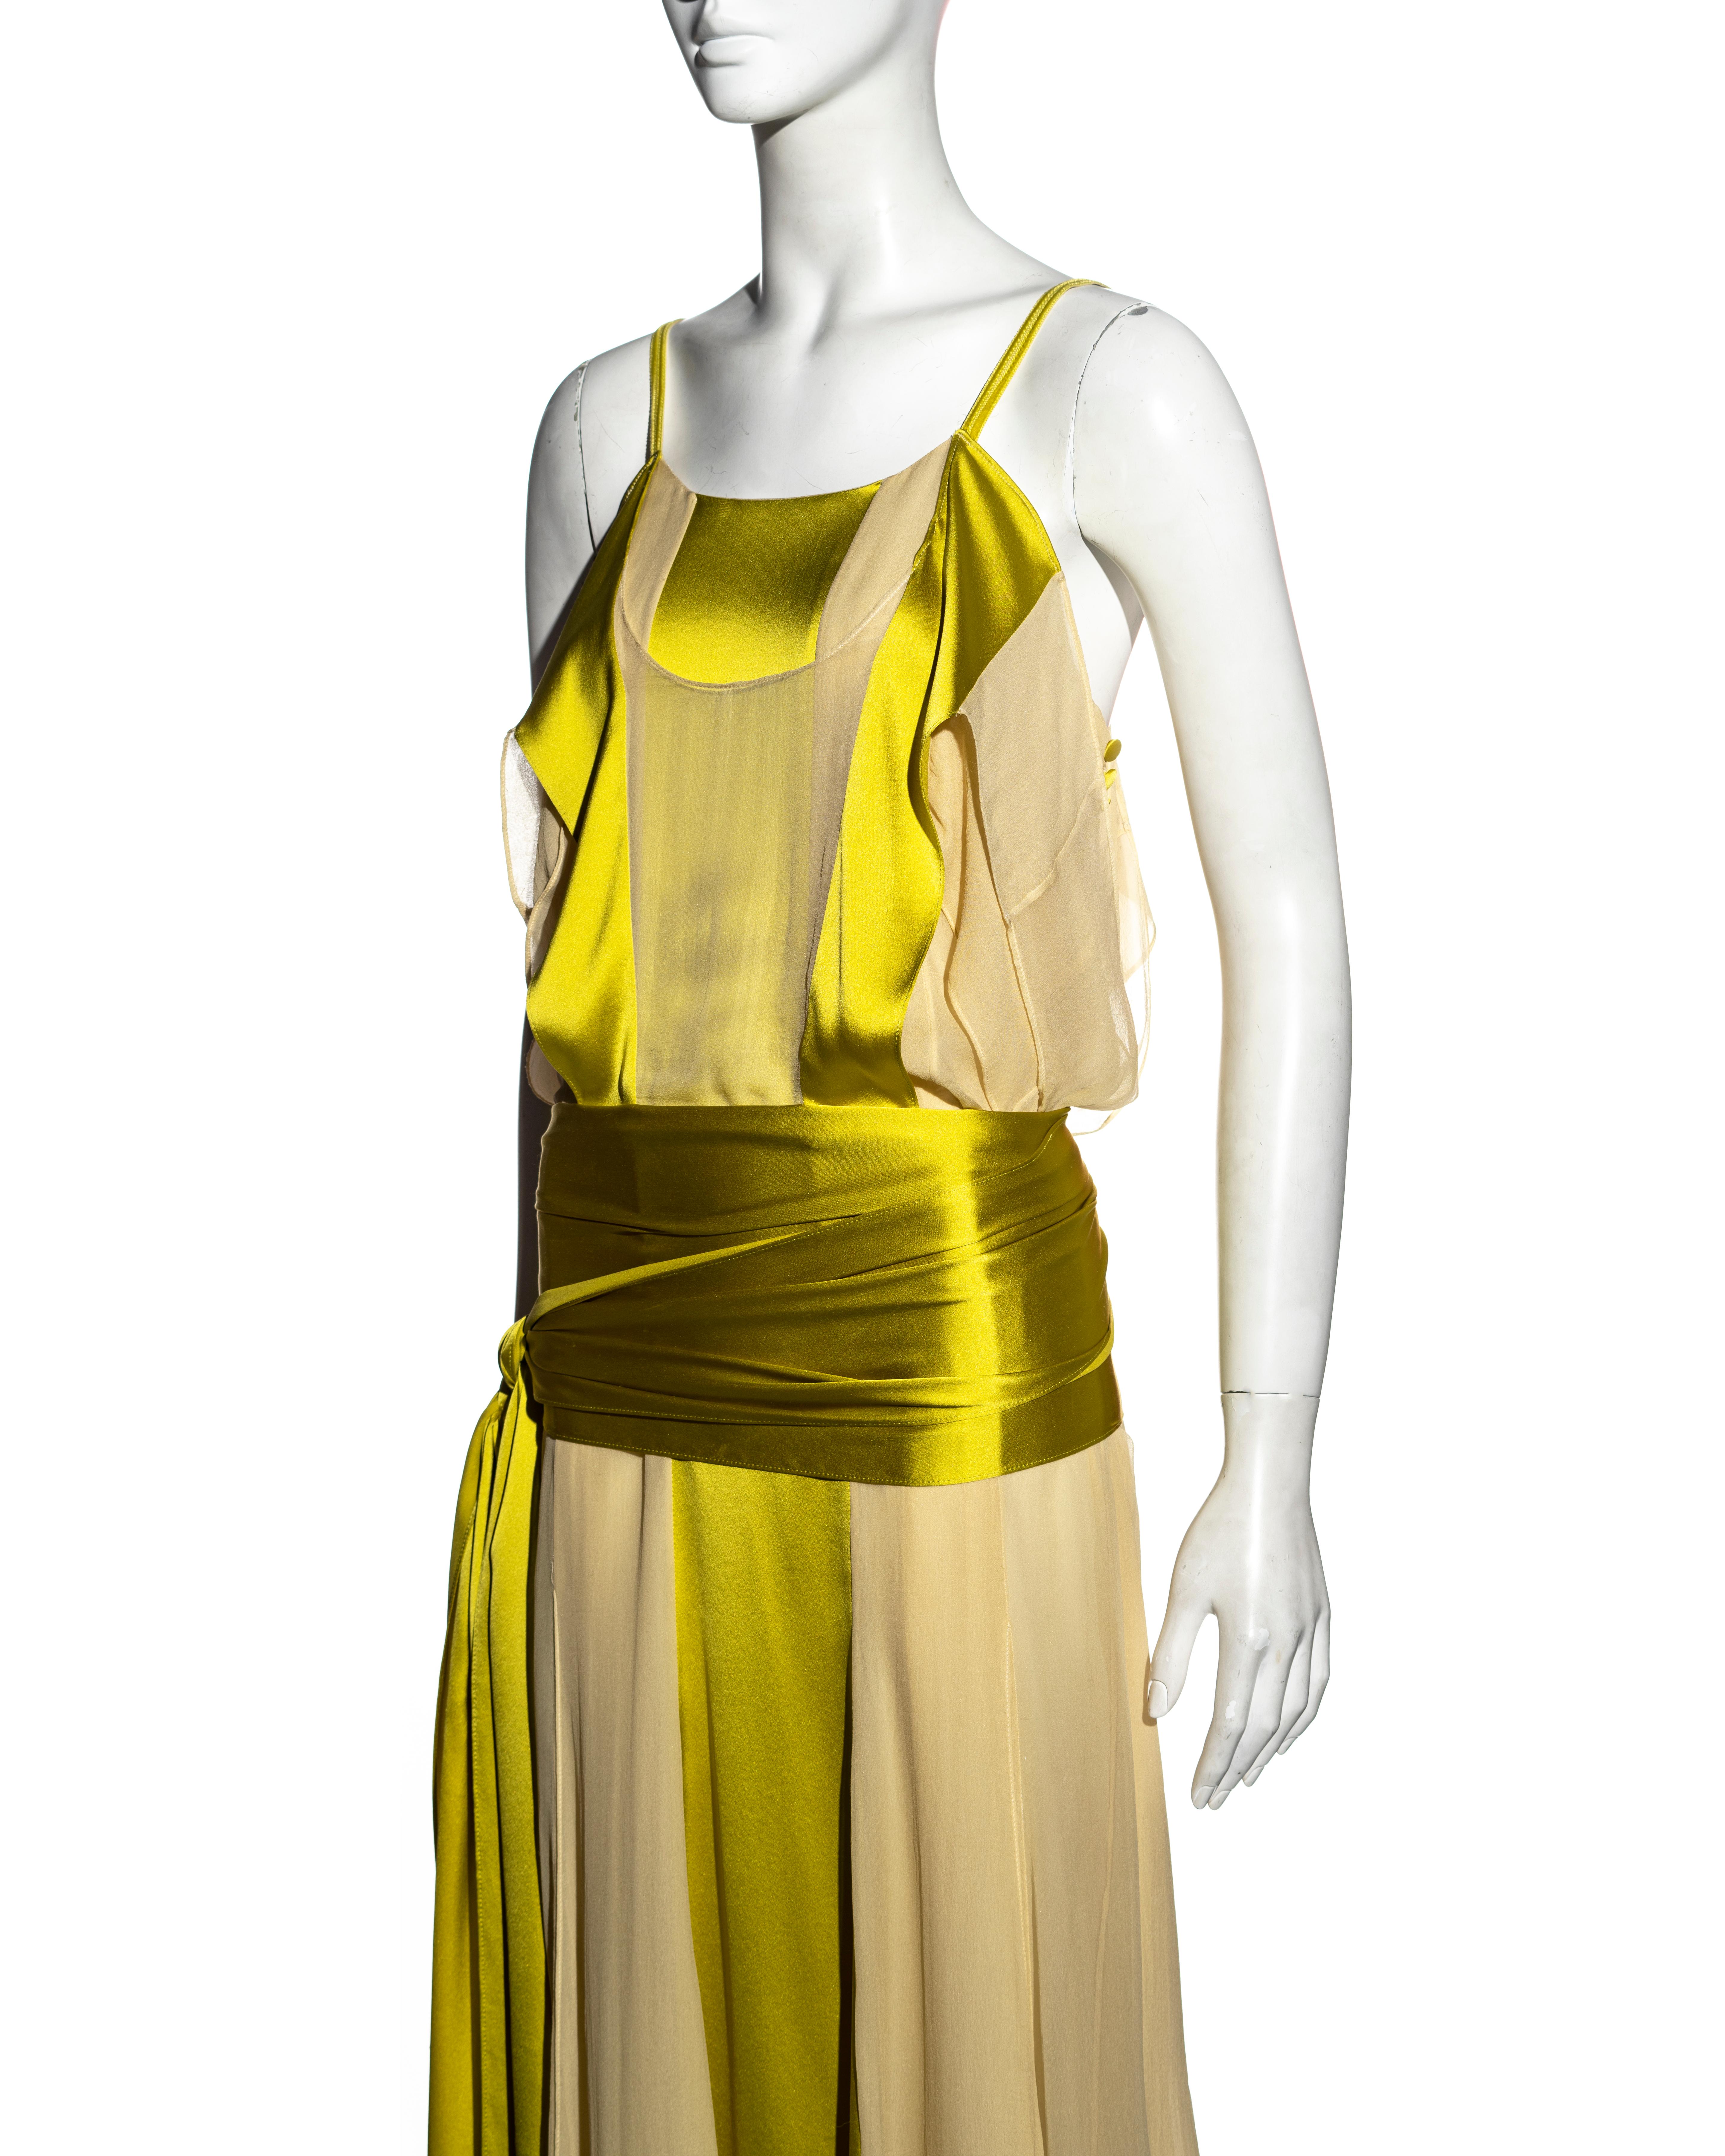 Women's Yves Saint Laurent by Tom Ford chartreuse silk evening dress, ss 2004